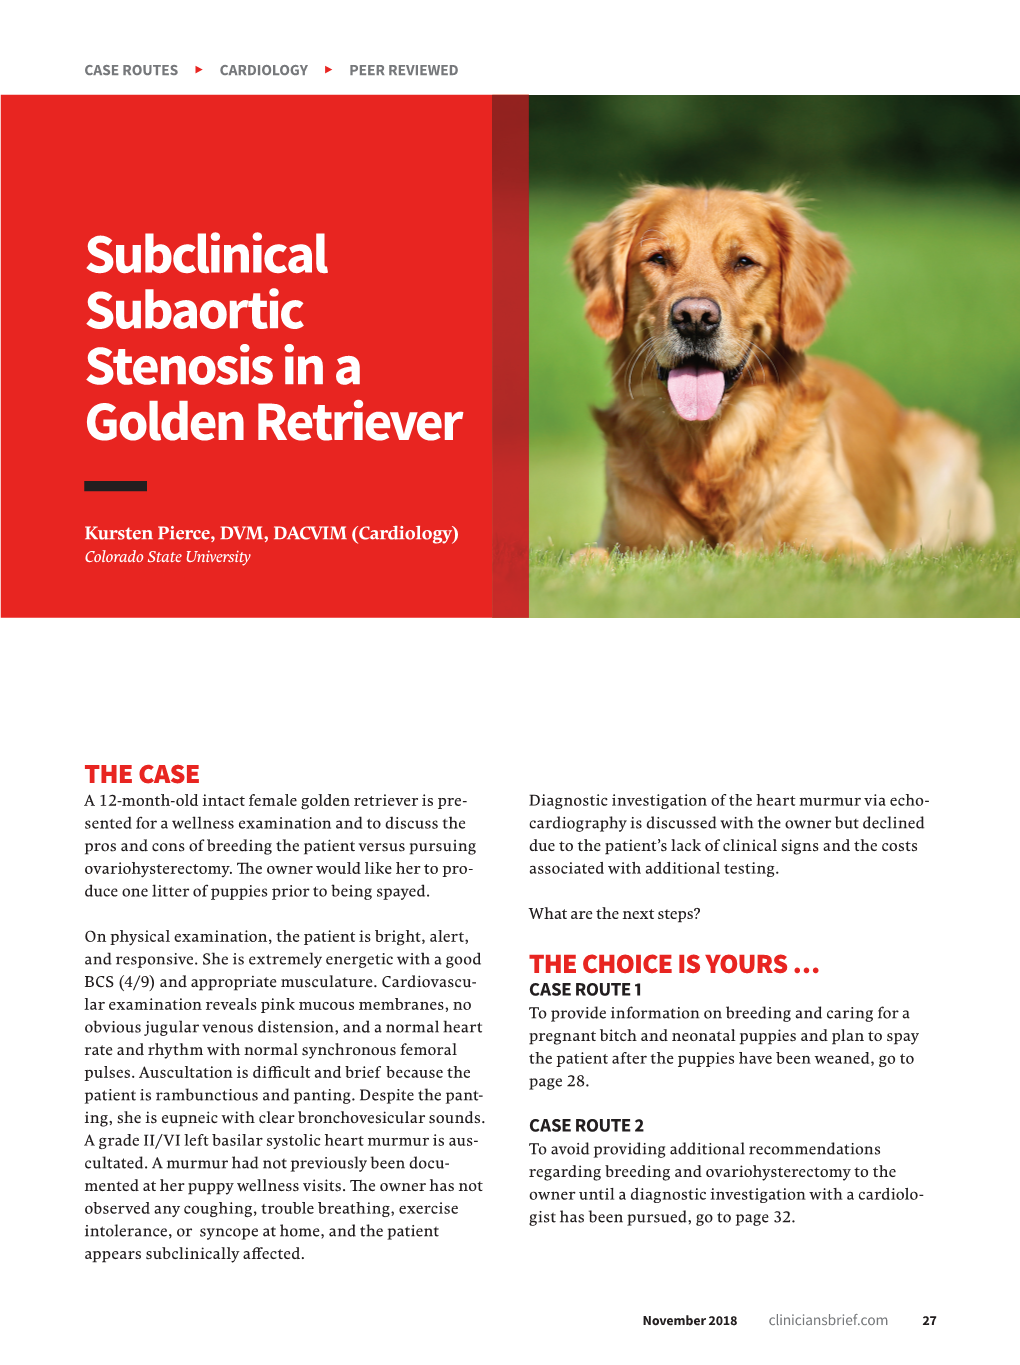 Subclinical Subaortic Stenosis in a Golden Retriever